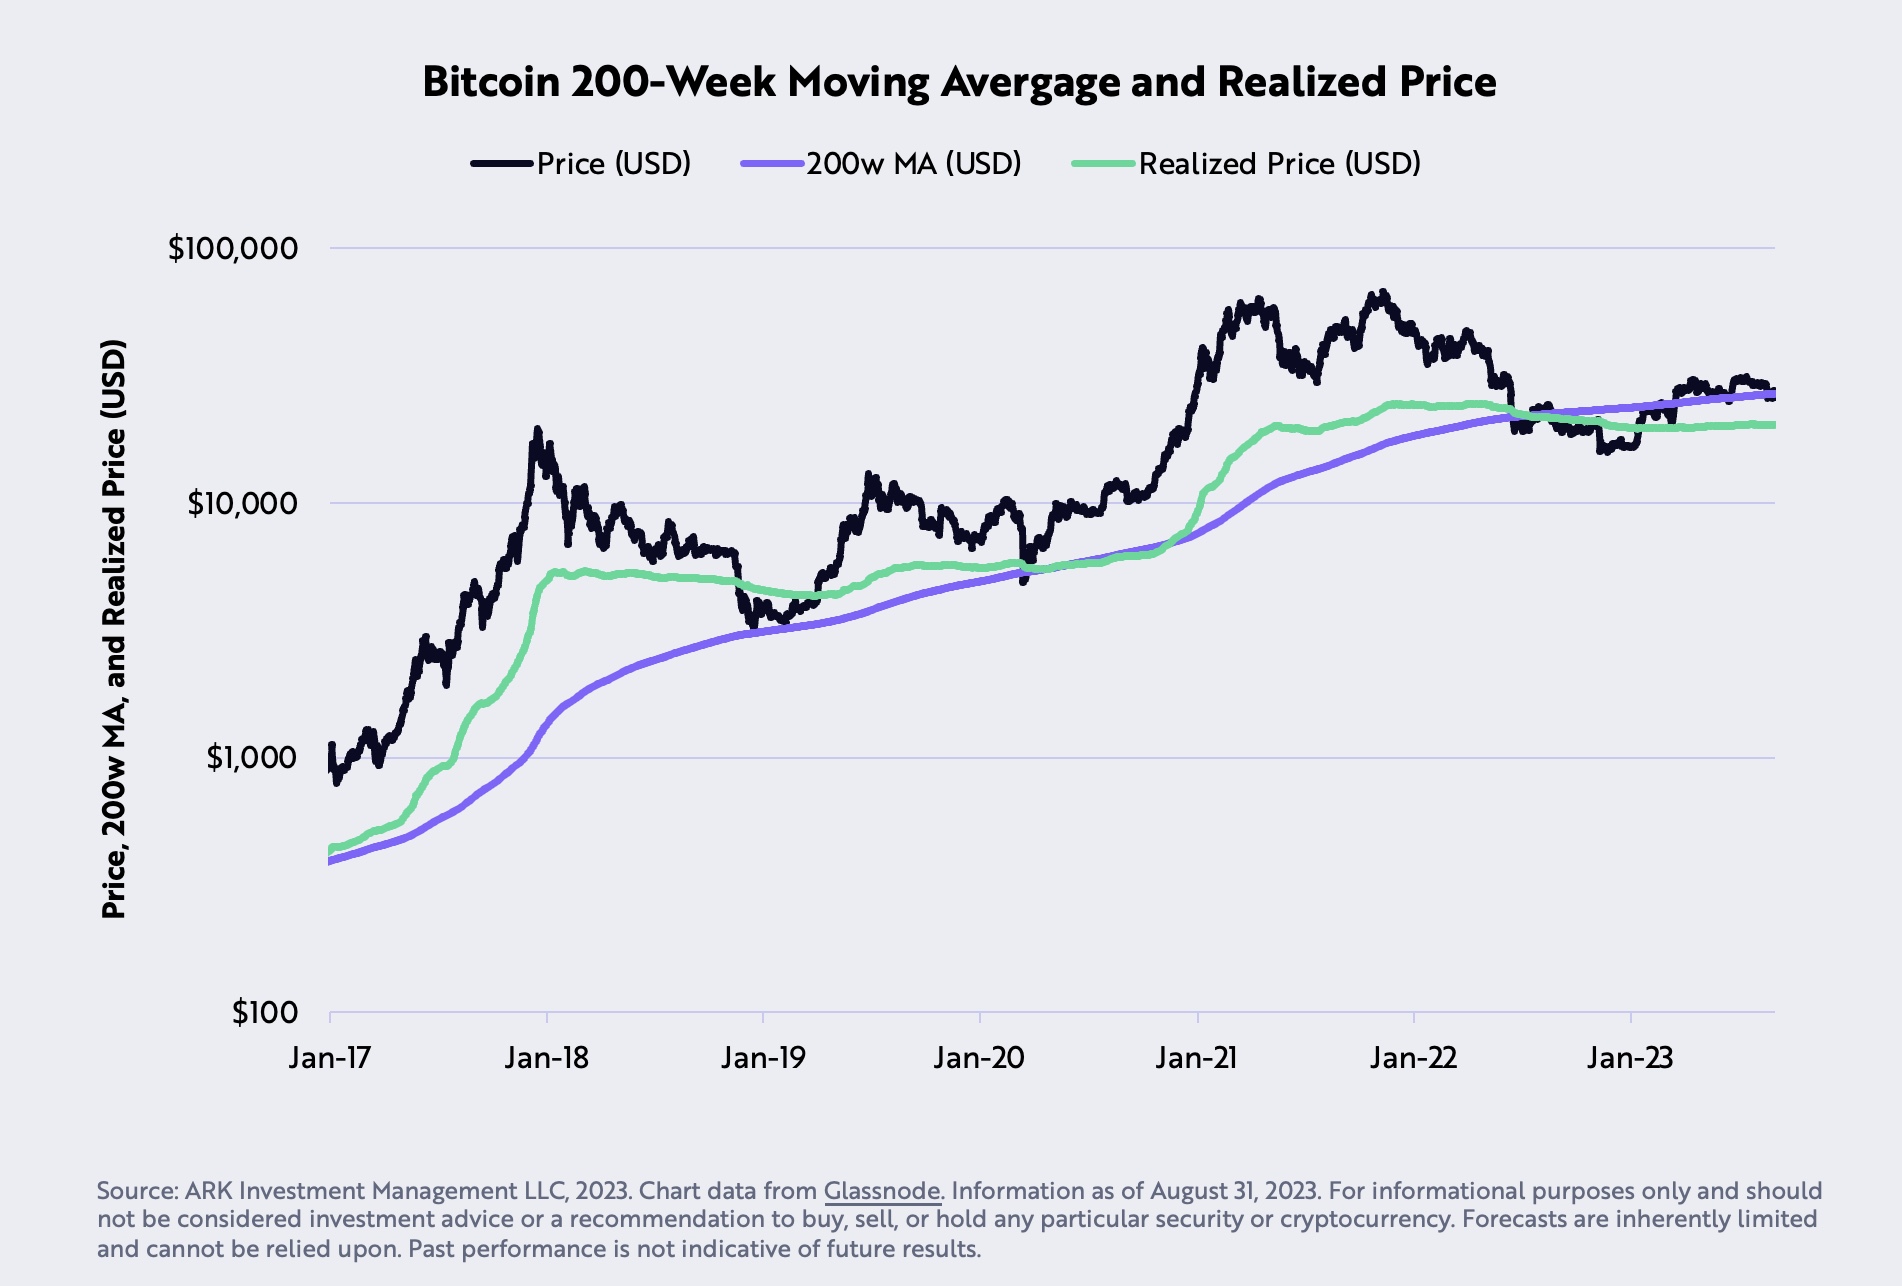 Bitcoin 200-Week Moving Average and Realized Price